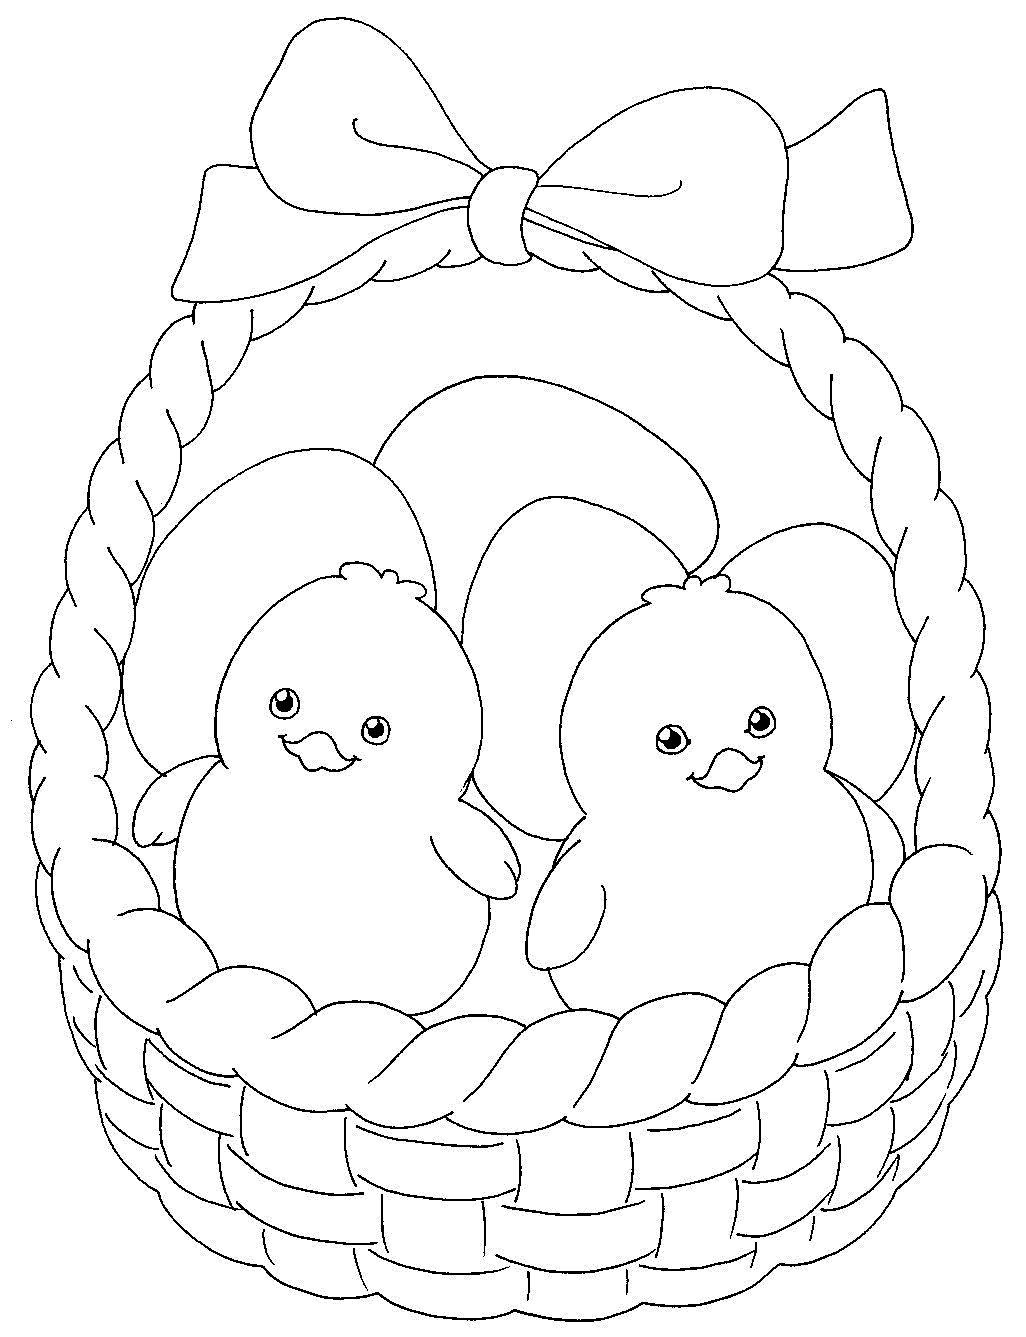 Easter Basket Coloring Pages – iconmaker.info